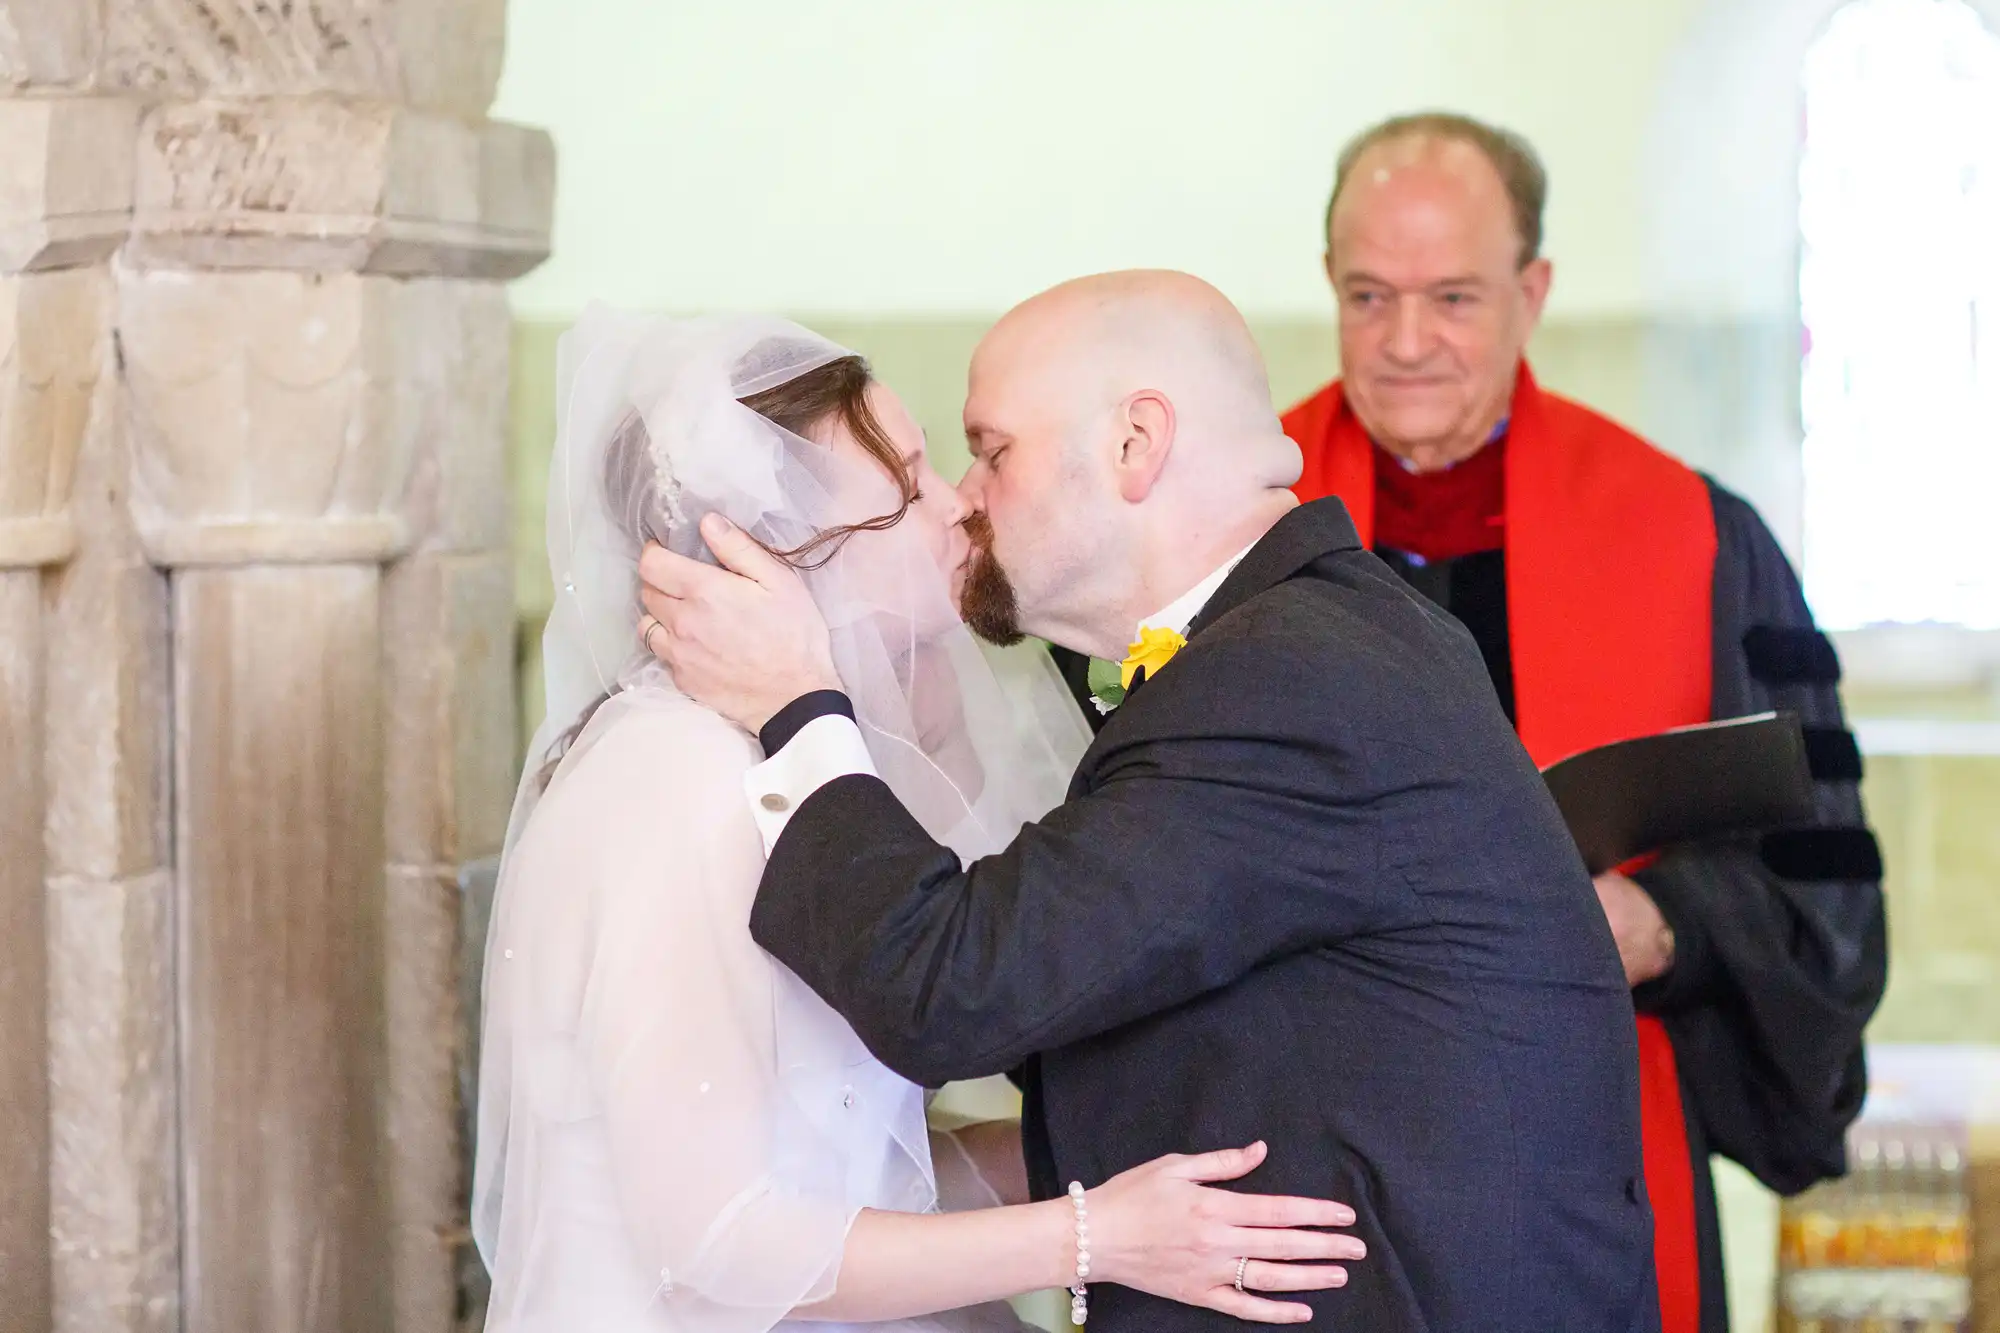 A bride and groom kiss at the altar, a priest in red robes observes in the background, in a church setting.